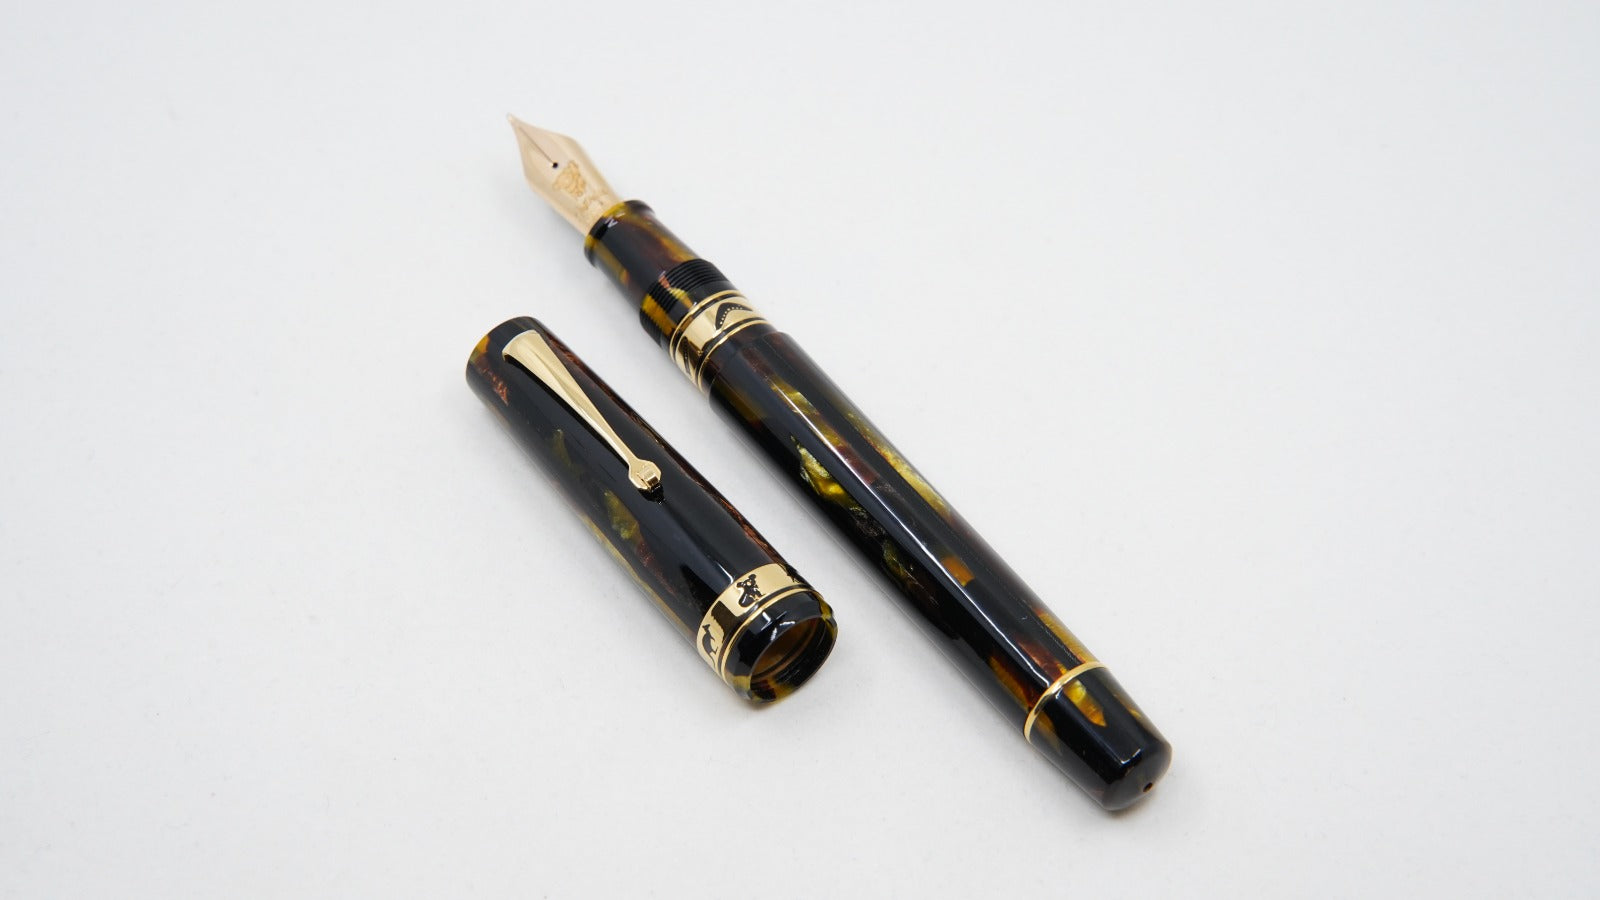 ASC Australia Series Bologna Extra - The Daintree Limited Edition of 50 Pens